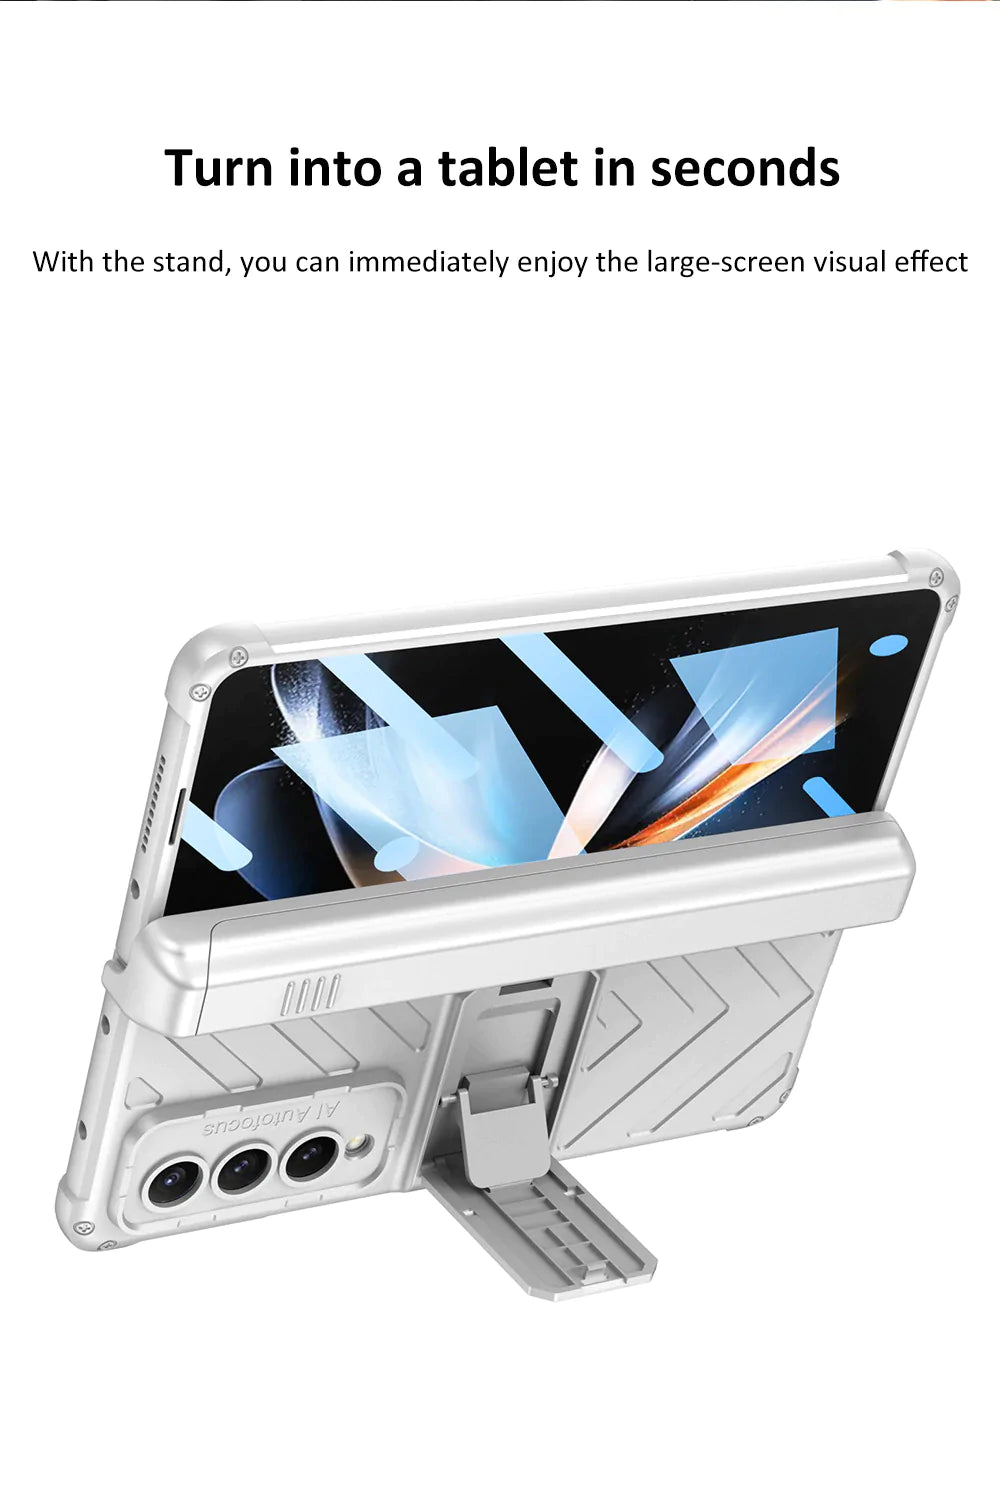 Shockproof Armor Magnetic Hinge Bracket Case With Front Glass For Galaxy Z Fold Series